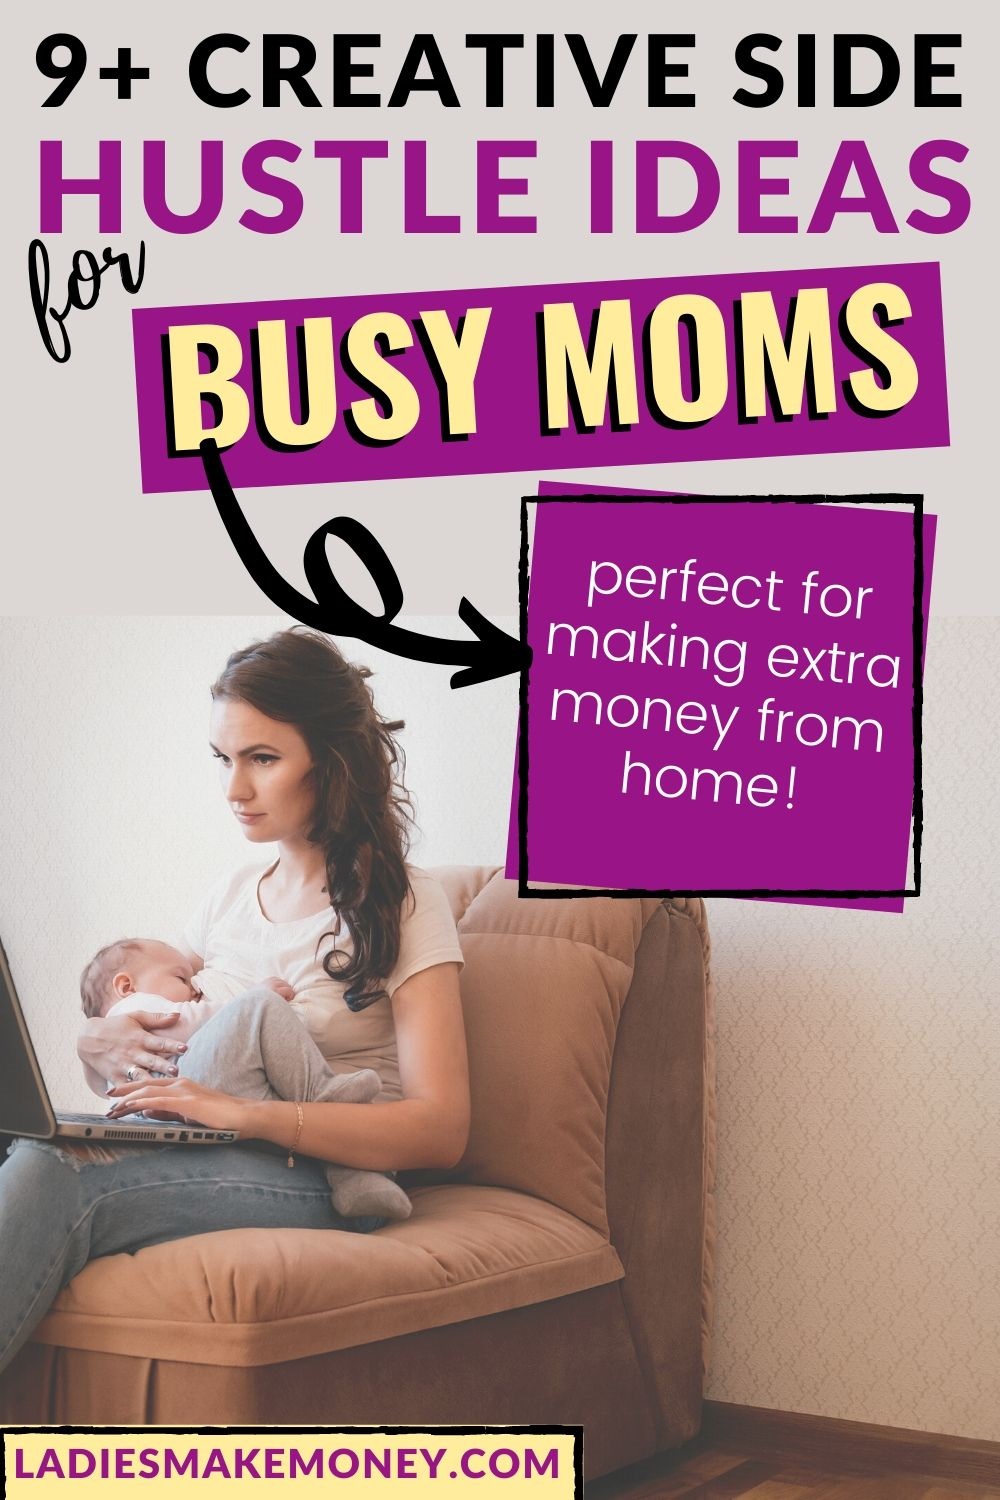 Making money online has never been easier and with so many different ways you are sure to find something! Side hustles are a great way to make an extra $1,000 or more per month! Here are over 10 of the best side hustle ideas for moms, college students, or anyone looking to start a legit side hustle! #sidehustle #sidehustleideas #makemoneyonline #money